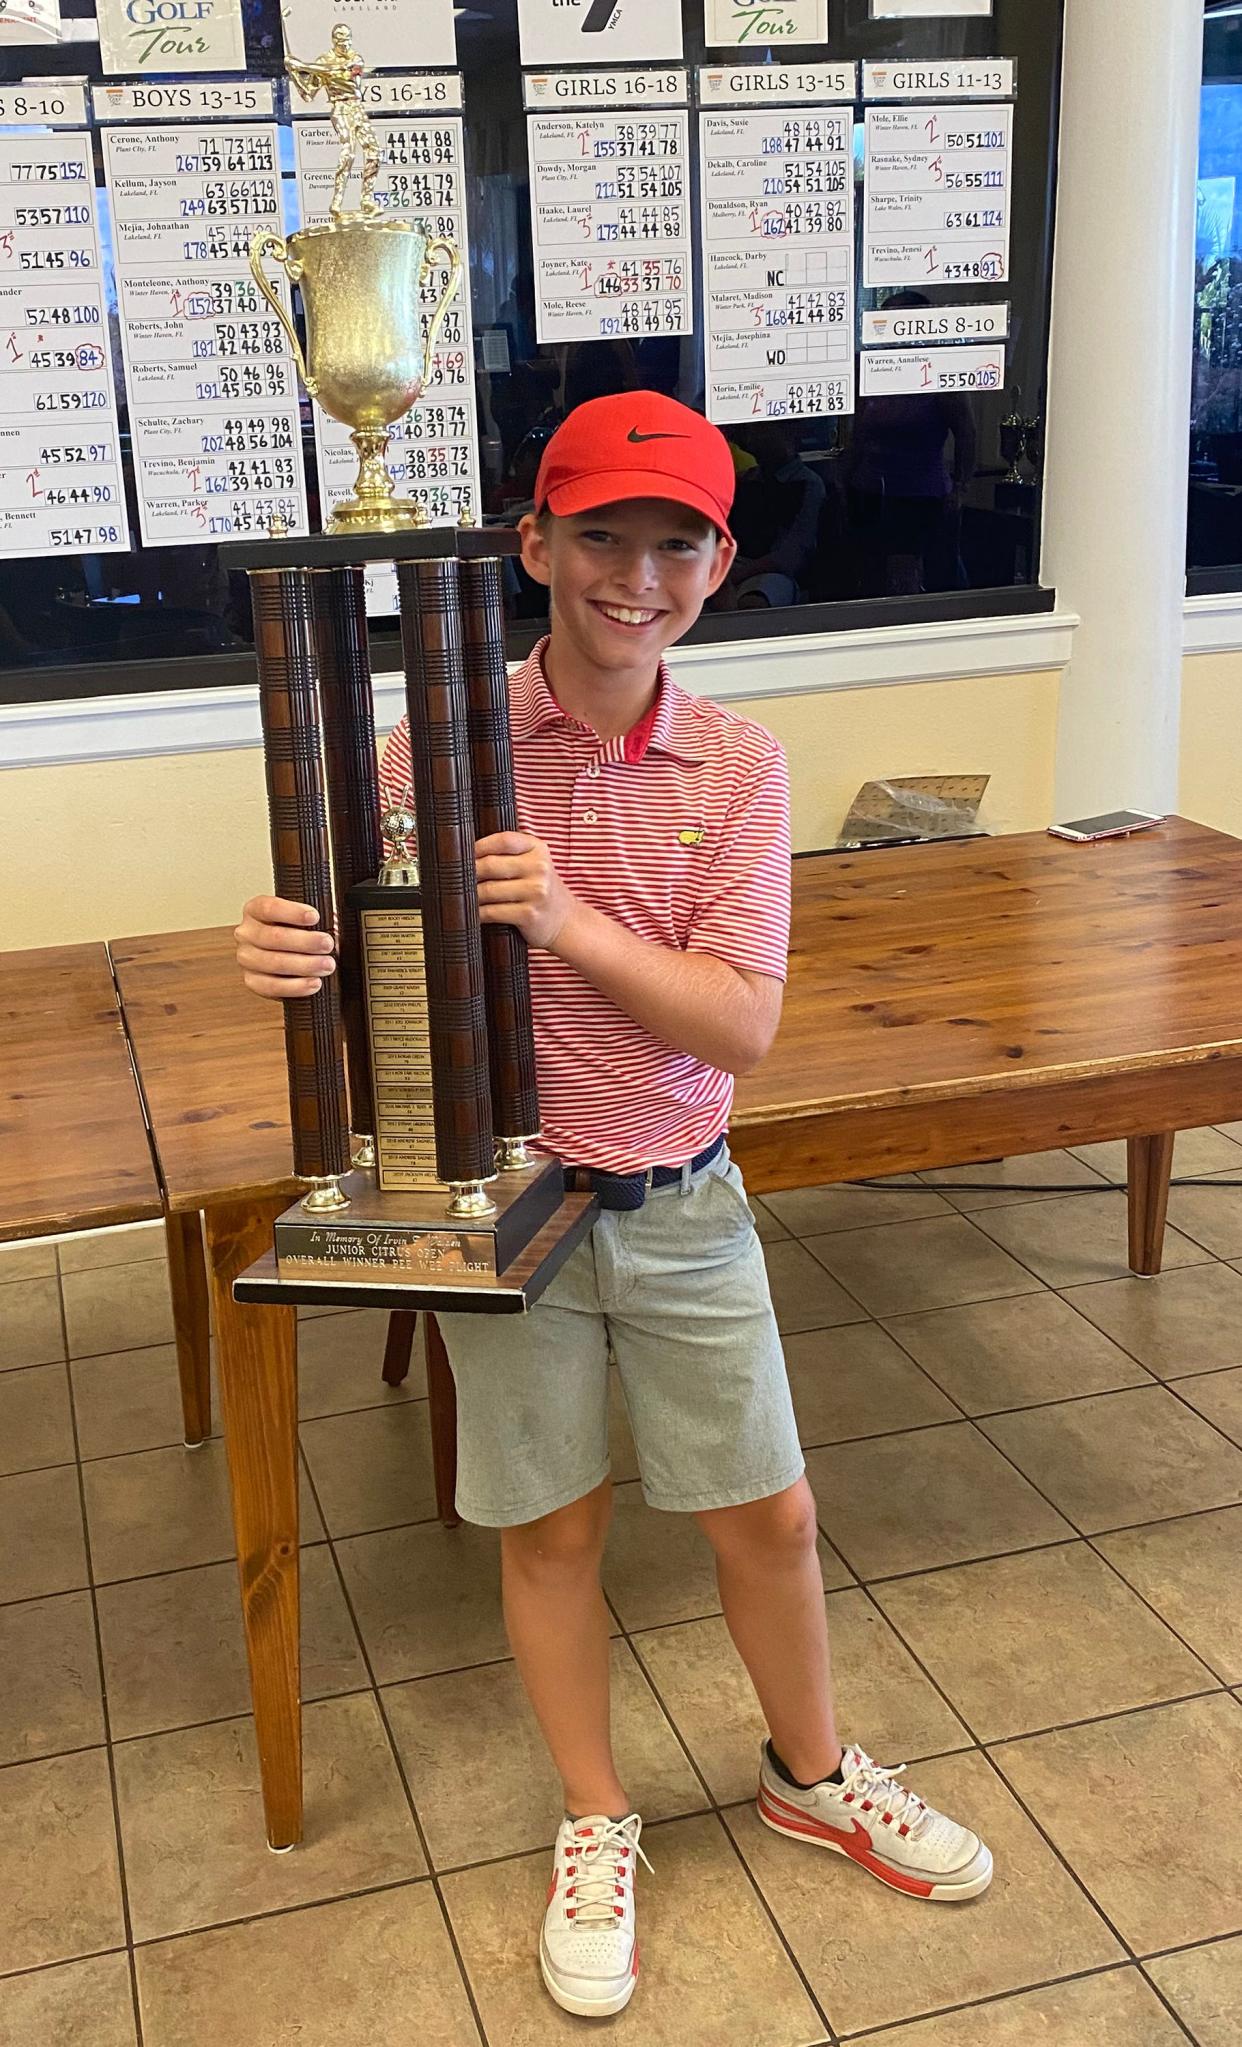 Jackson Helm holds the trophy after winning the Pee-Wee Division at the Junior Citrus golf tournament.